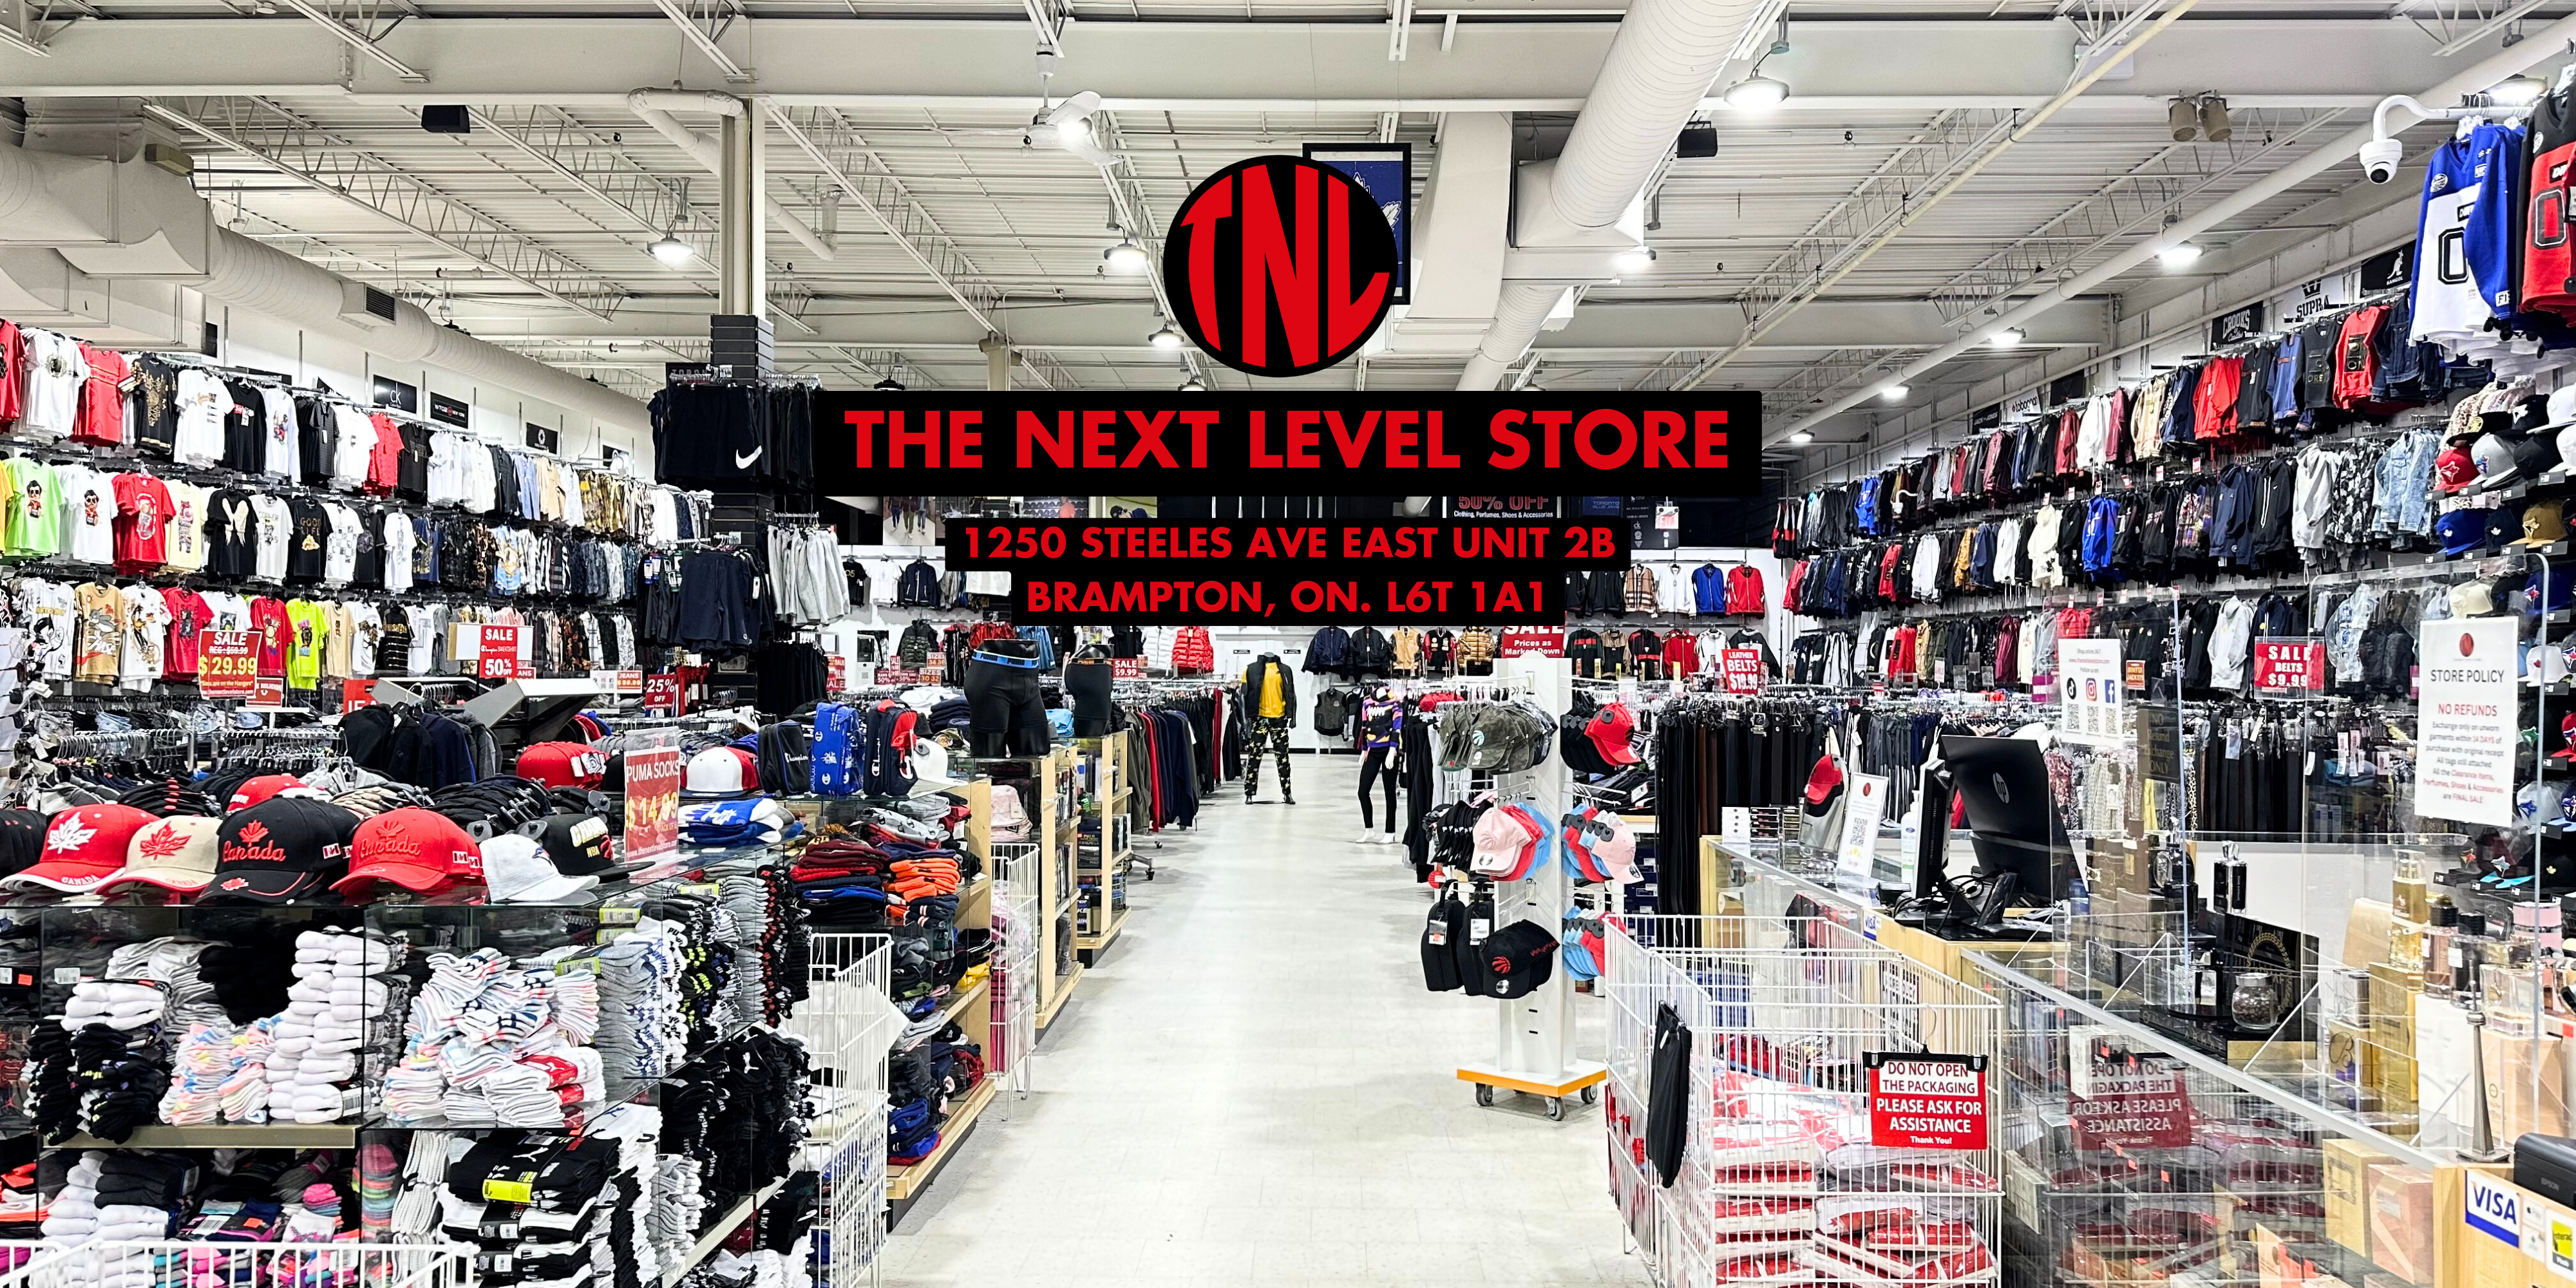 THE NEXT LEVEL STORE